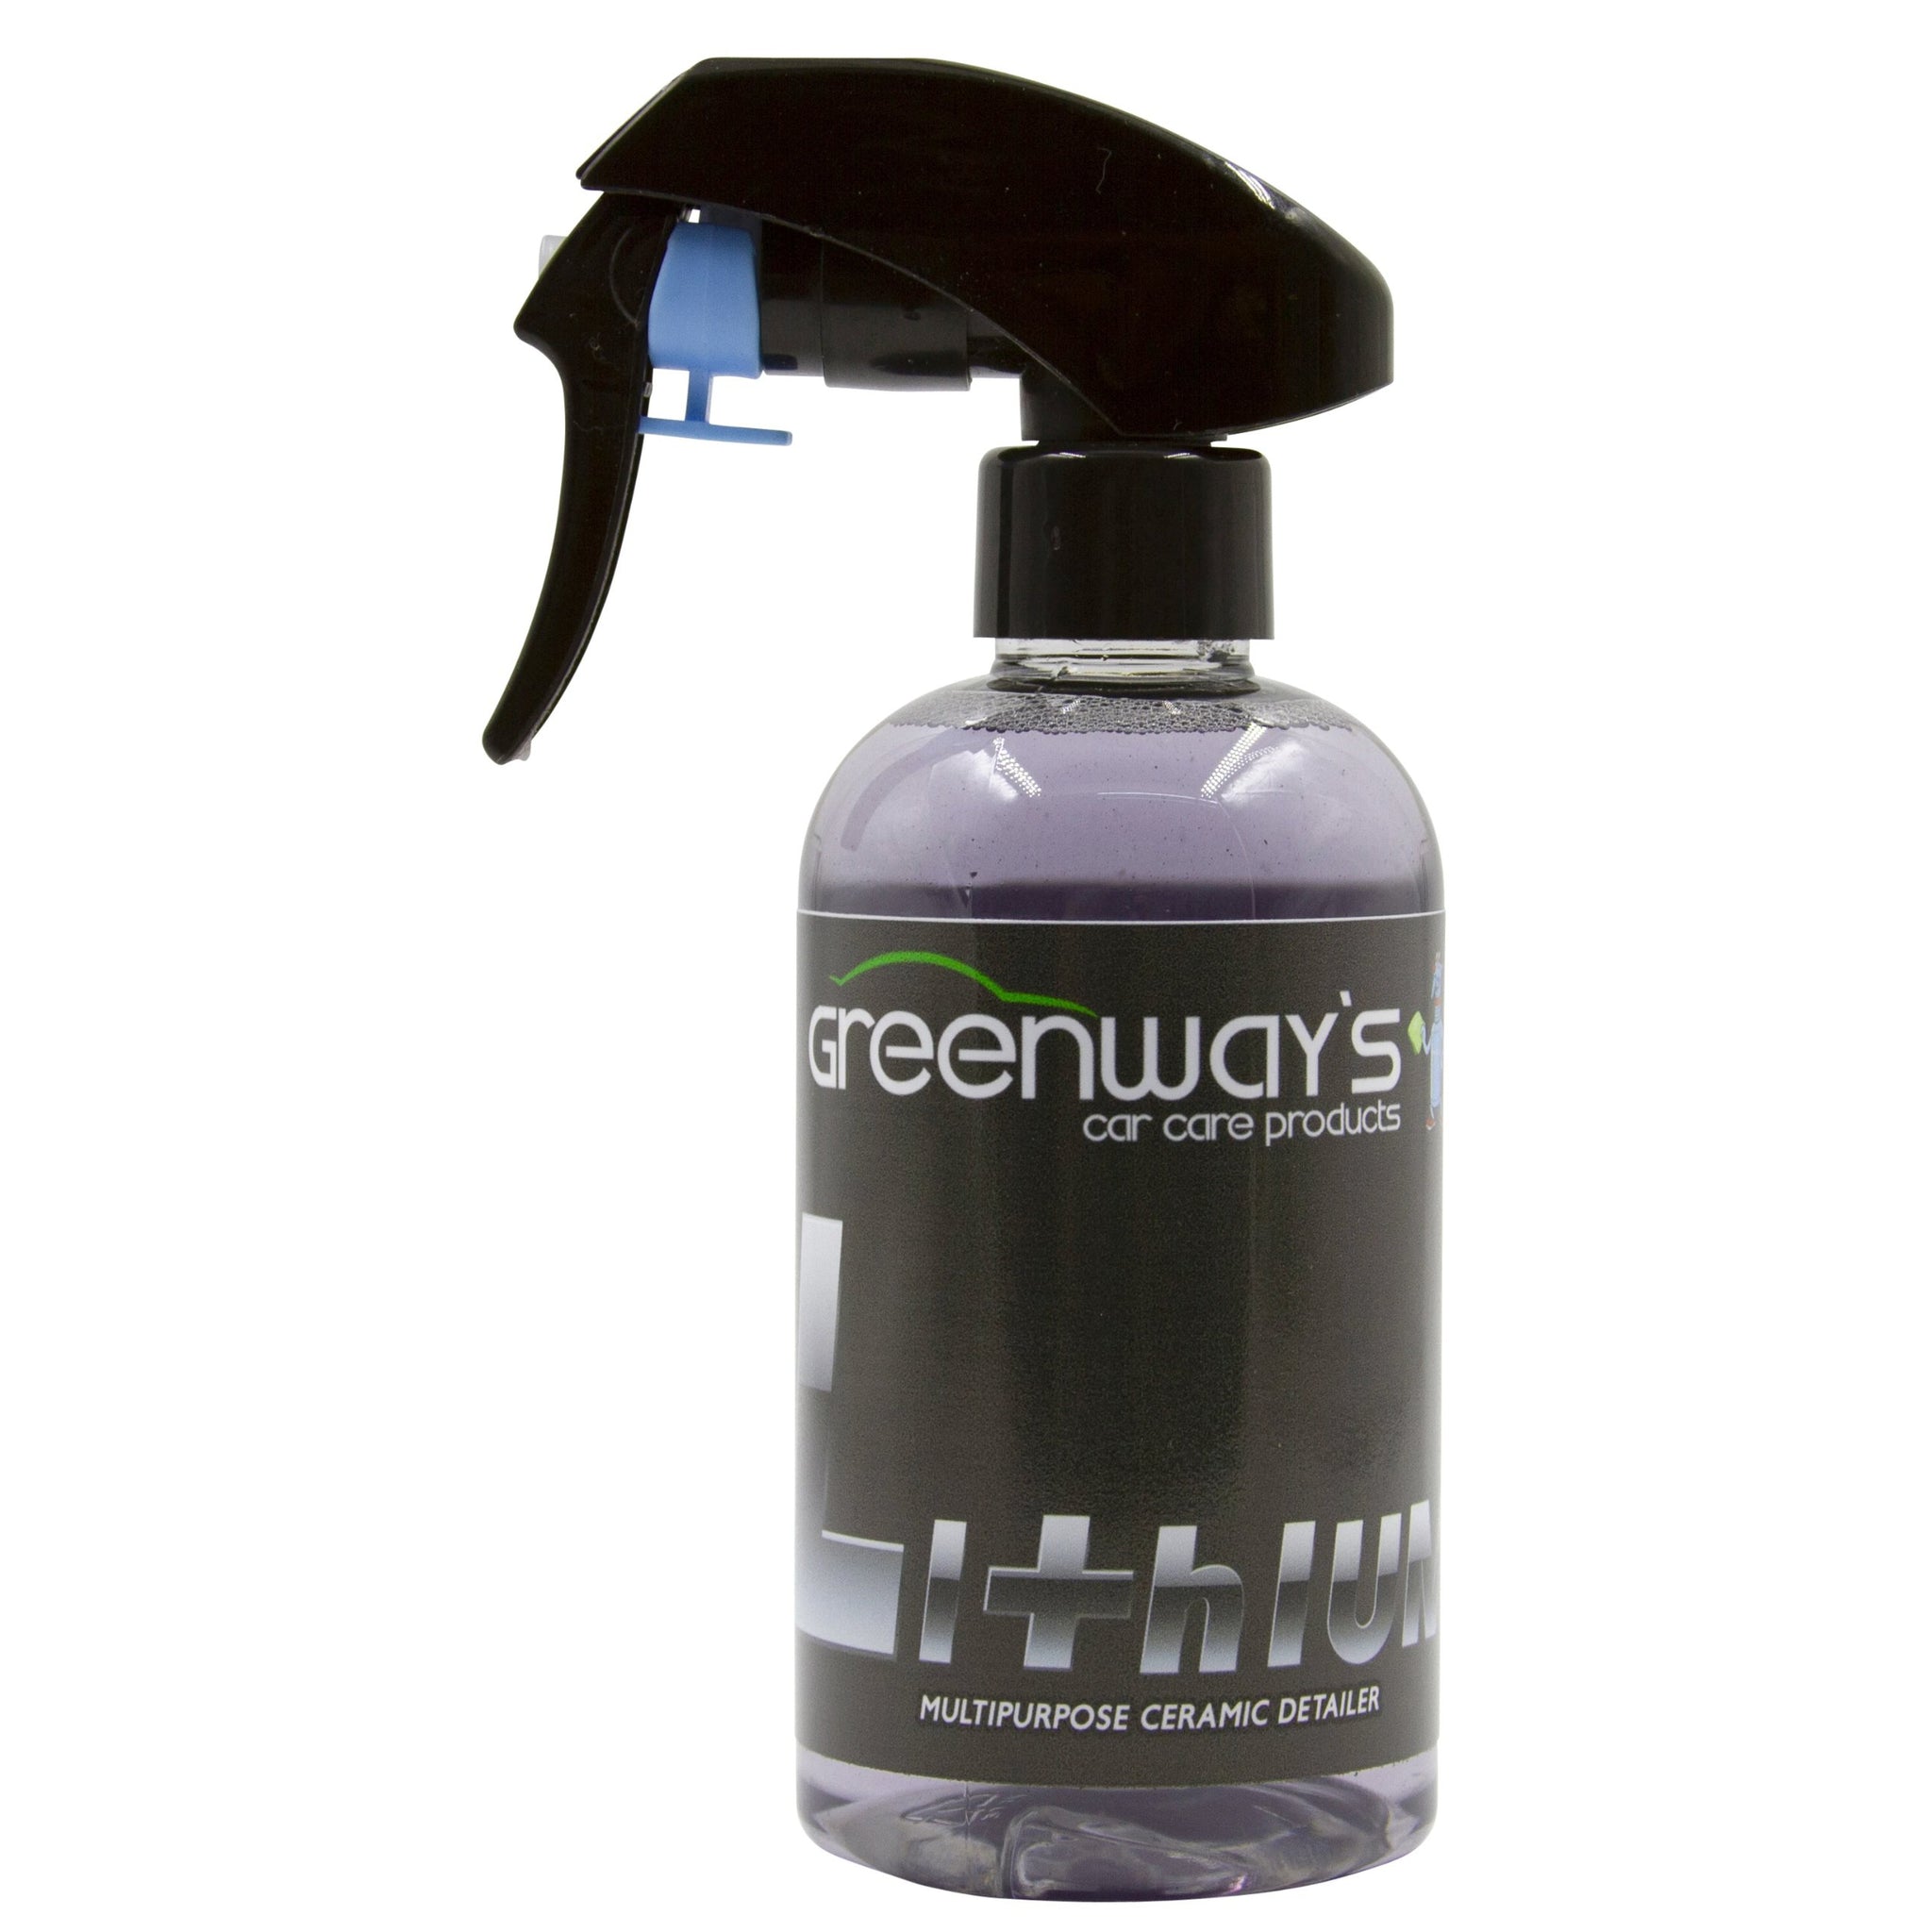 Greenway’s Lithium, graphene ceramic coating car sealant spray, extends current coating for enhanced protection, 8 ounces.